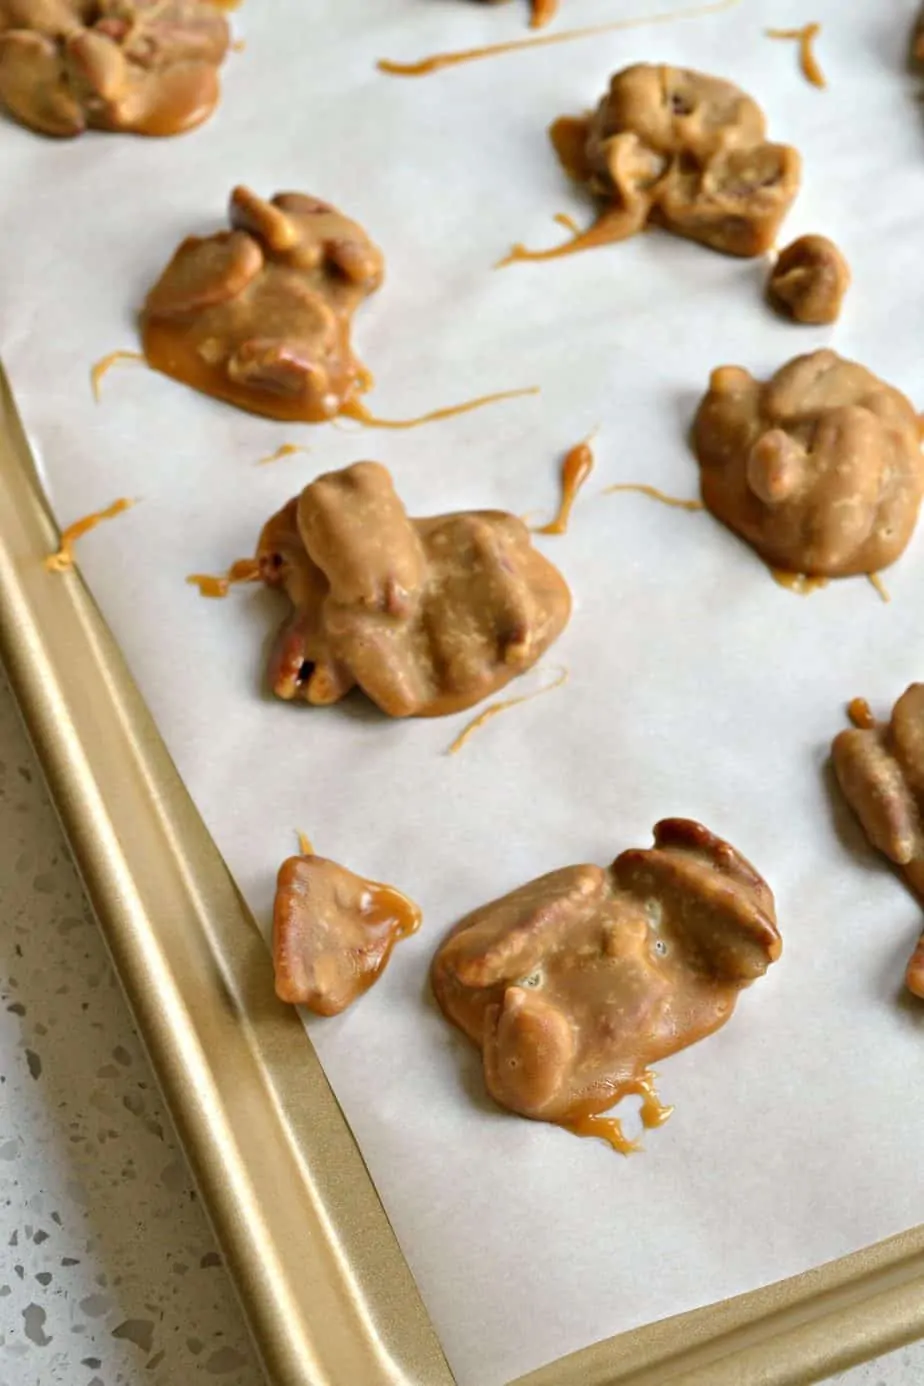 This scrumptious Southern Pecan Praline Recipe is made easy on the stovetop with six ingredients.